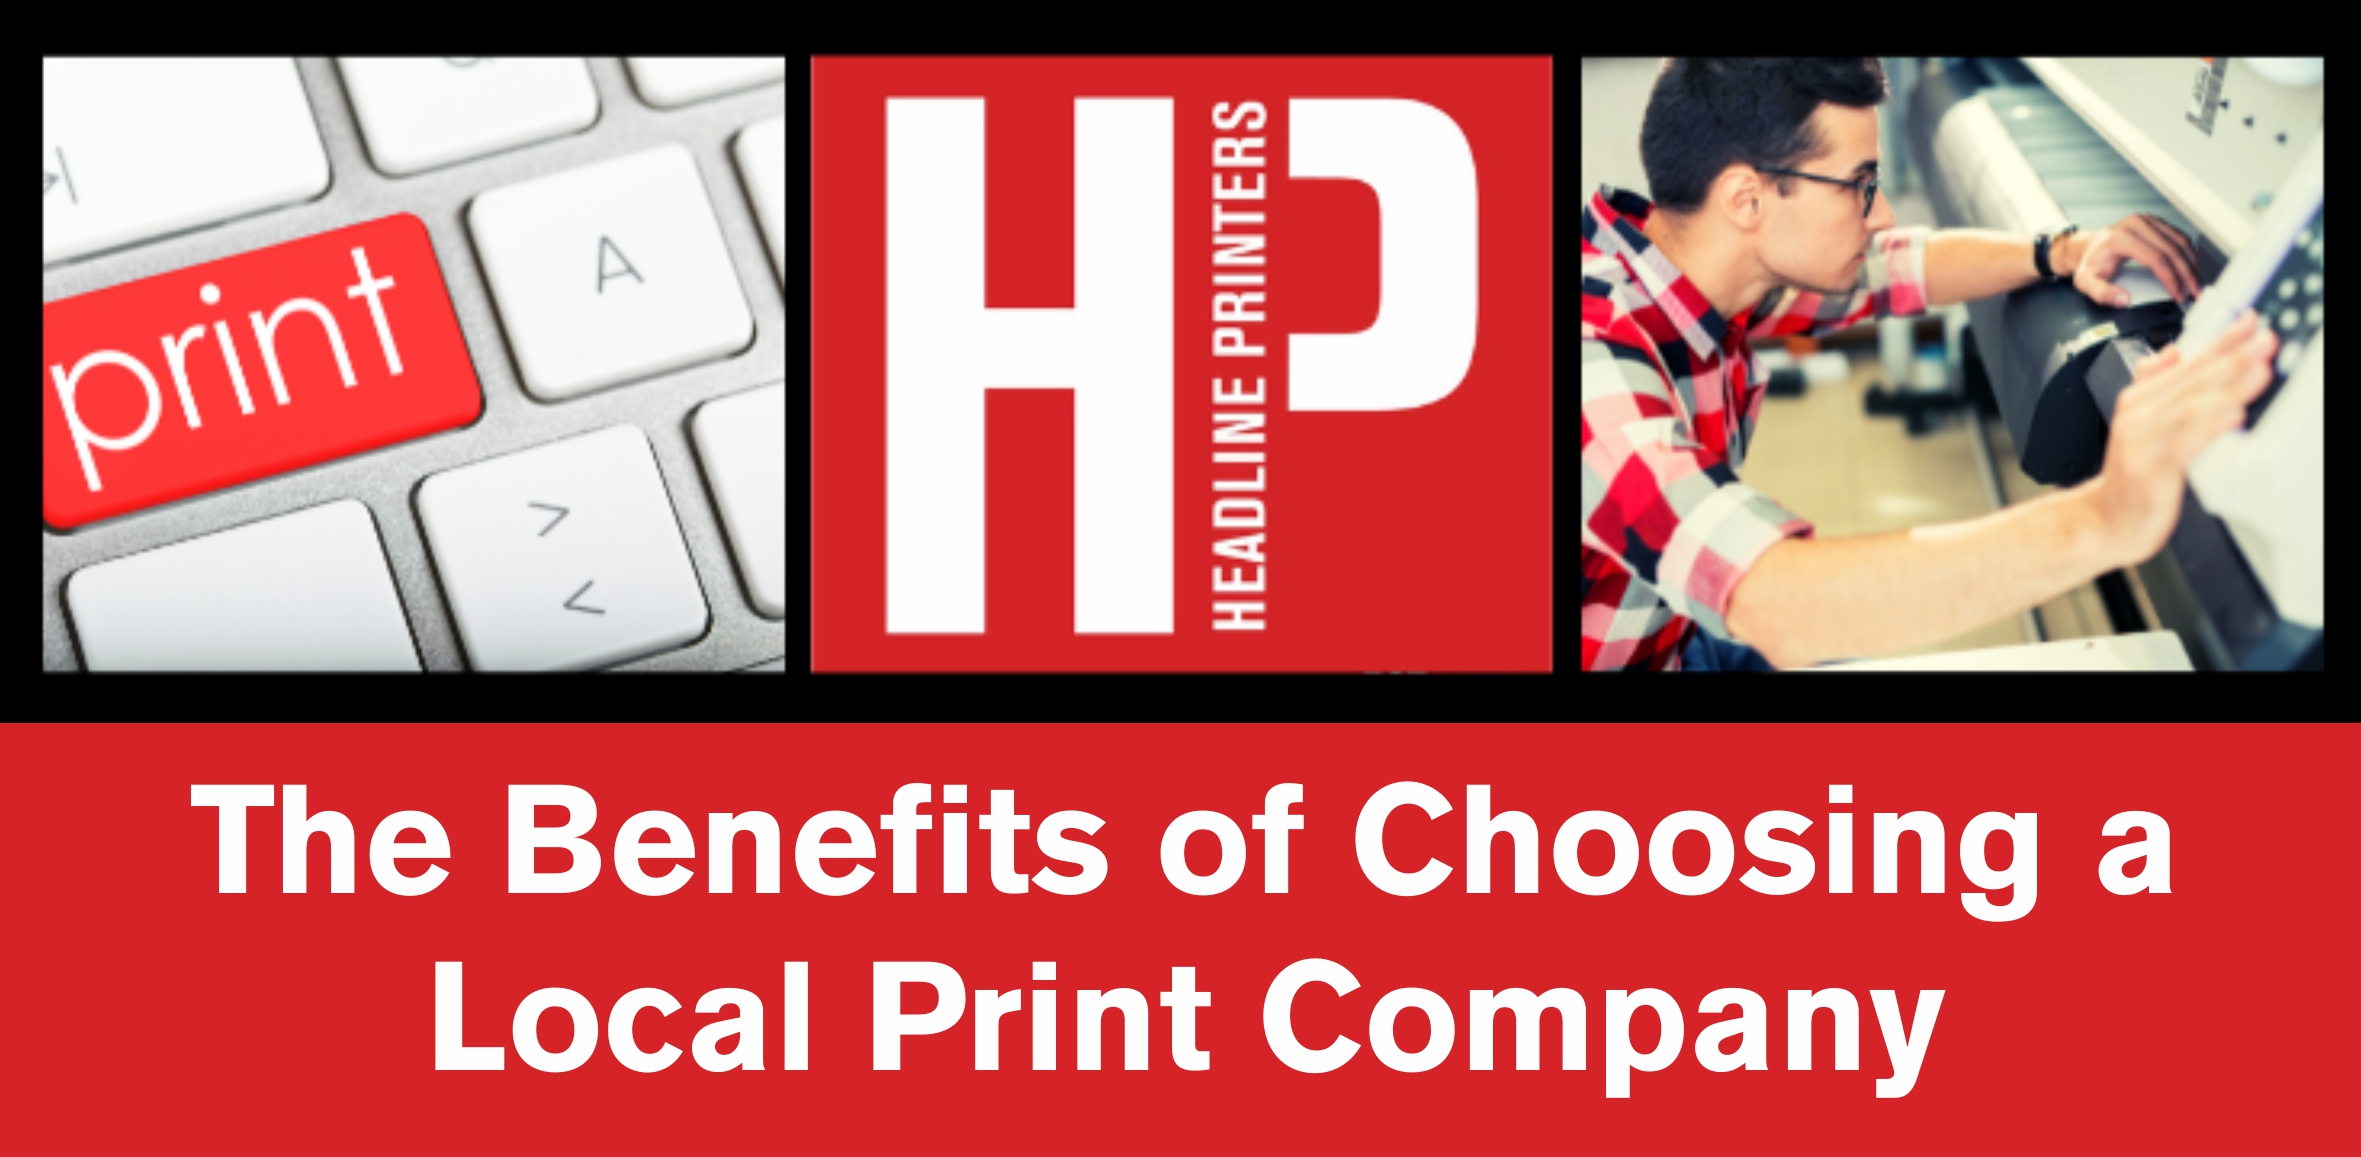 The Benefits of Choosing a Local Print Company